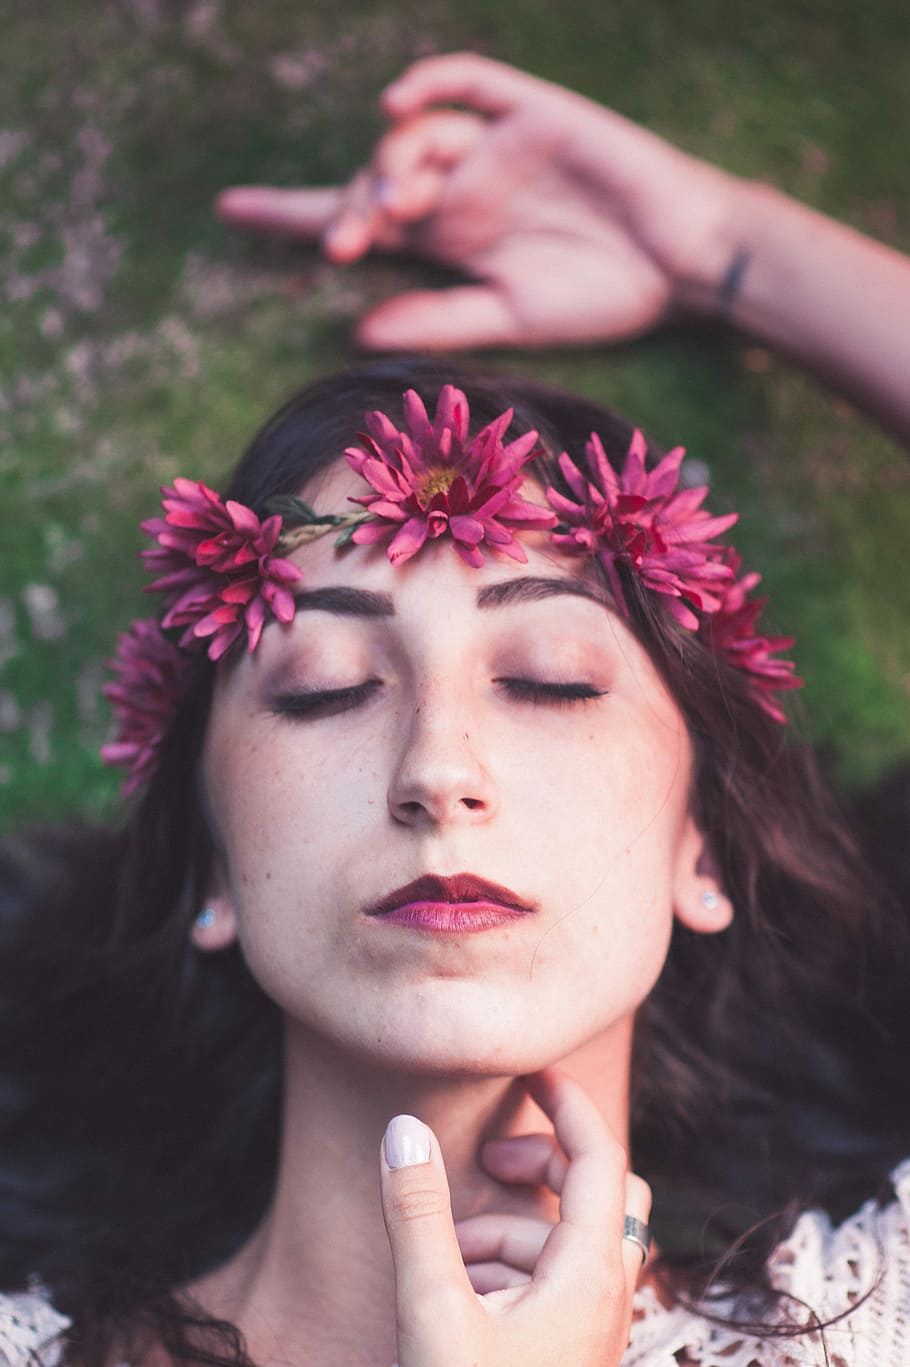 woman wearing pink floral headdress portrait selective focus photography, shallow focus photo of woman closing her eyes with pink flower crown